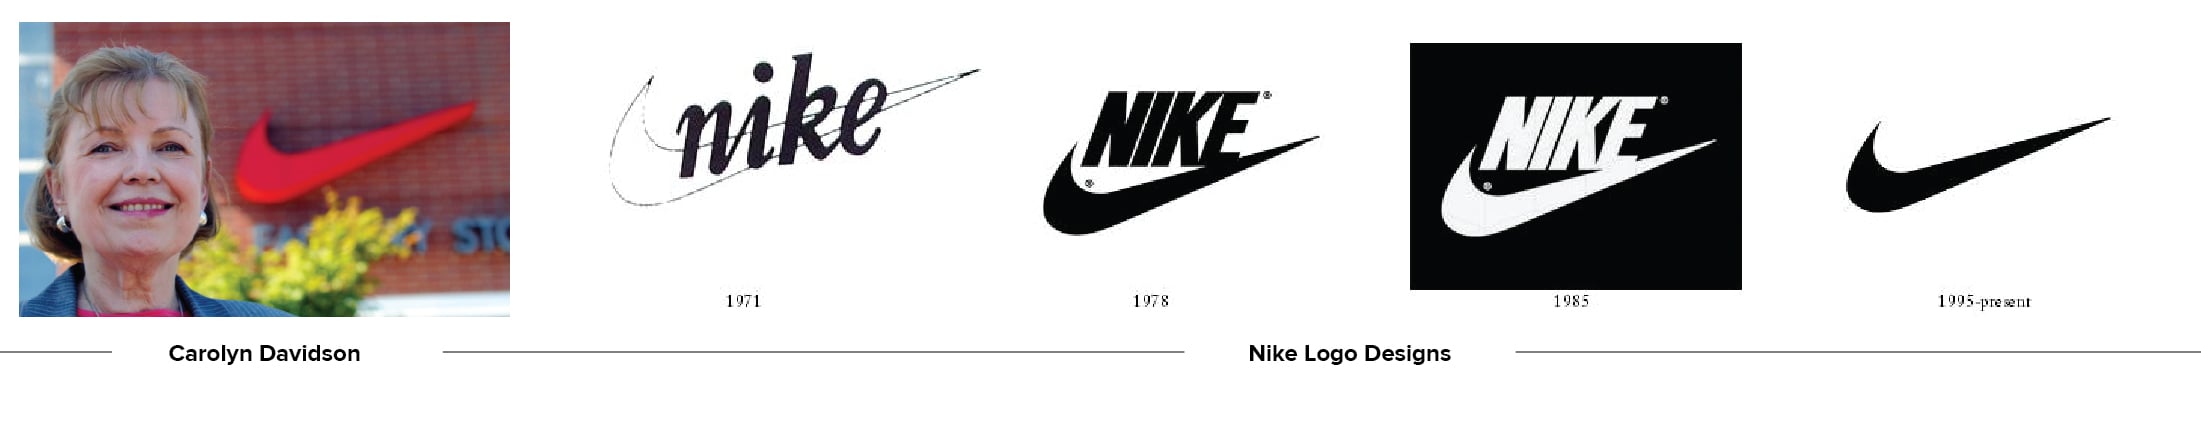 Nike's iconic Swoosh logo was designed by a graphic designer for